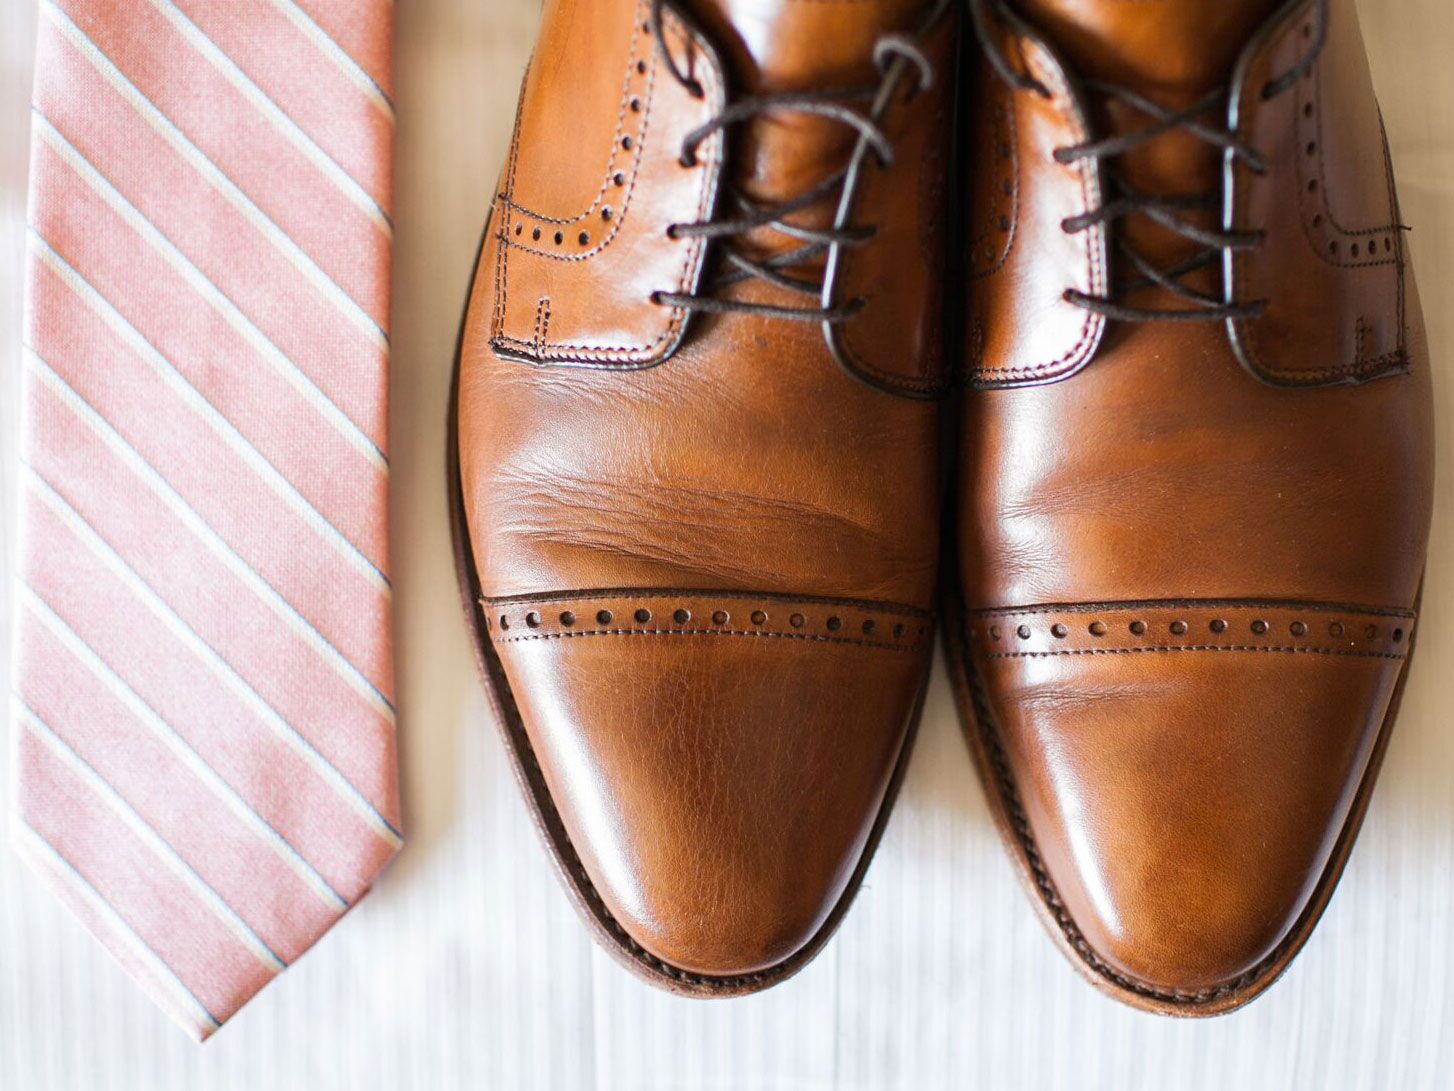 bronze dress shoes for wedding